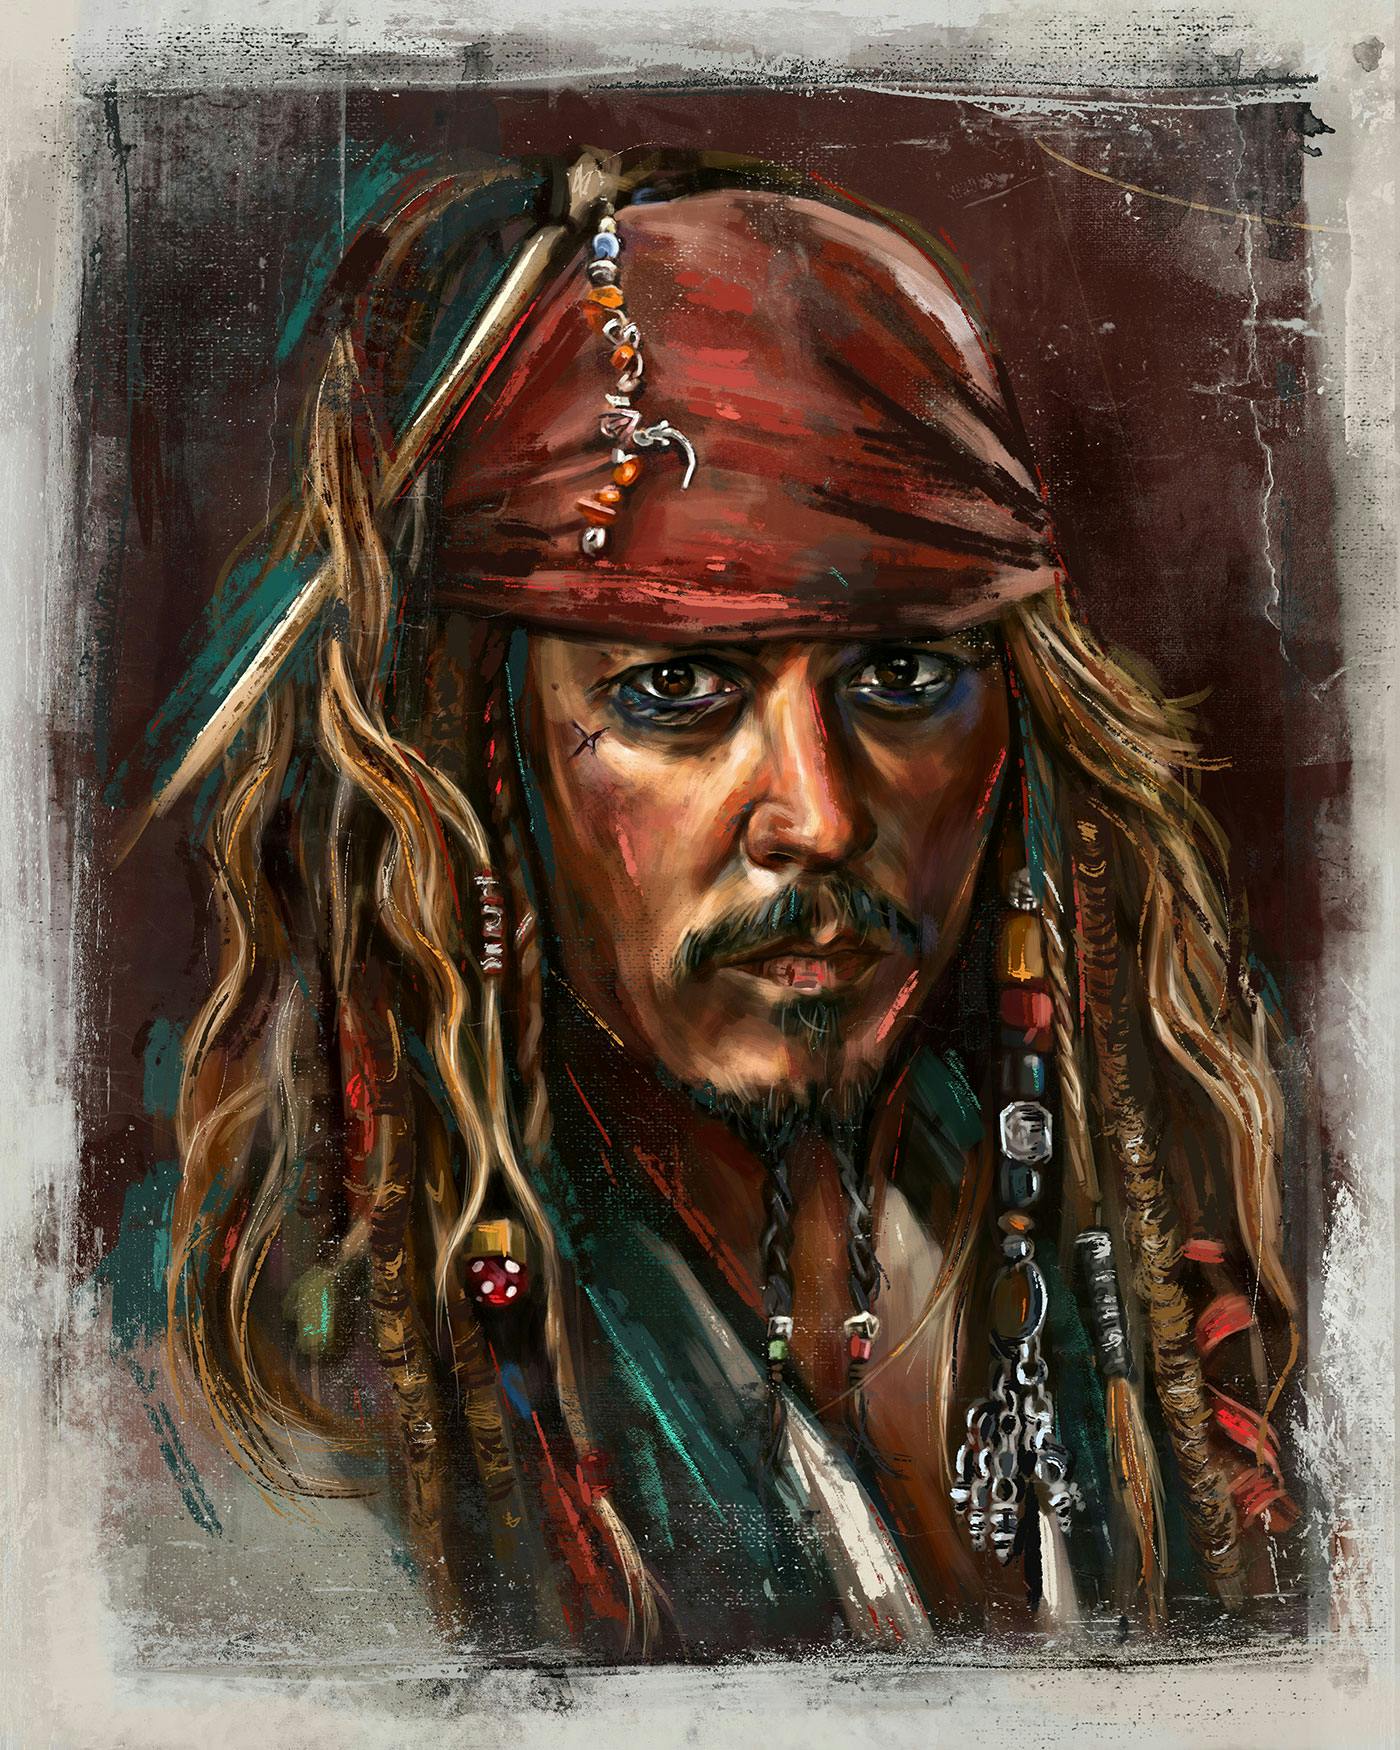 Original artwork of Captain Jack Sparrow from "Pirates of the Caribbean" created by Celebrity Fan Fest guest artist Robert Bruno